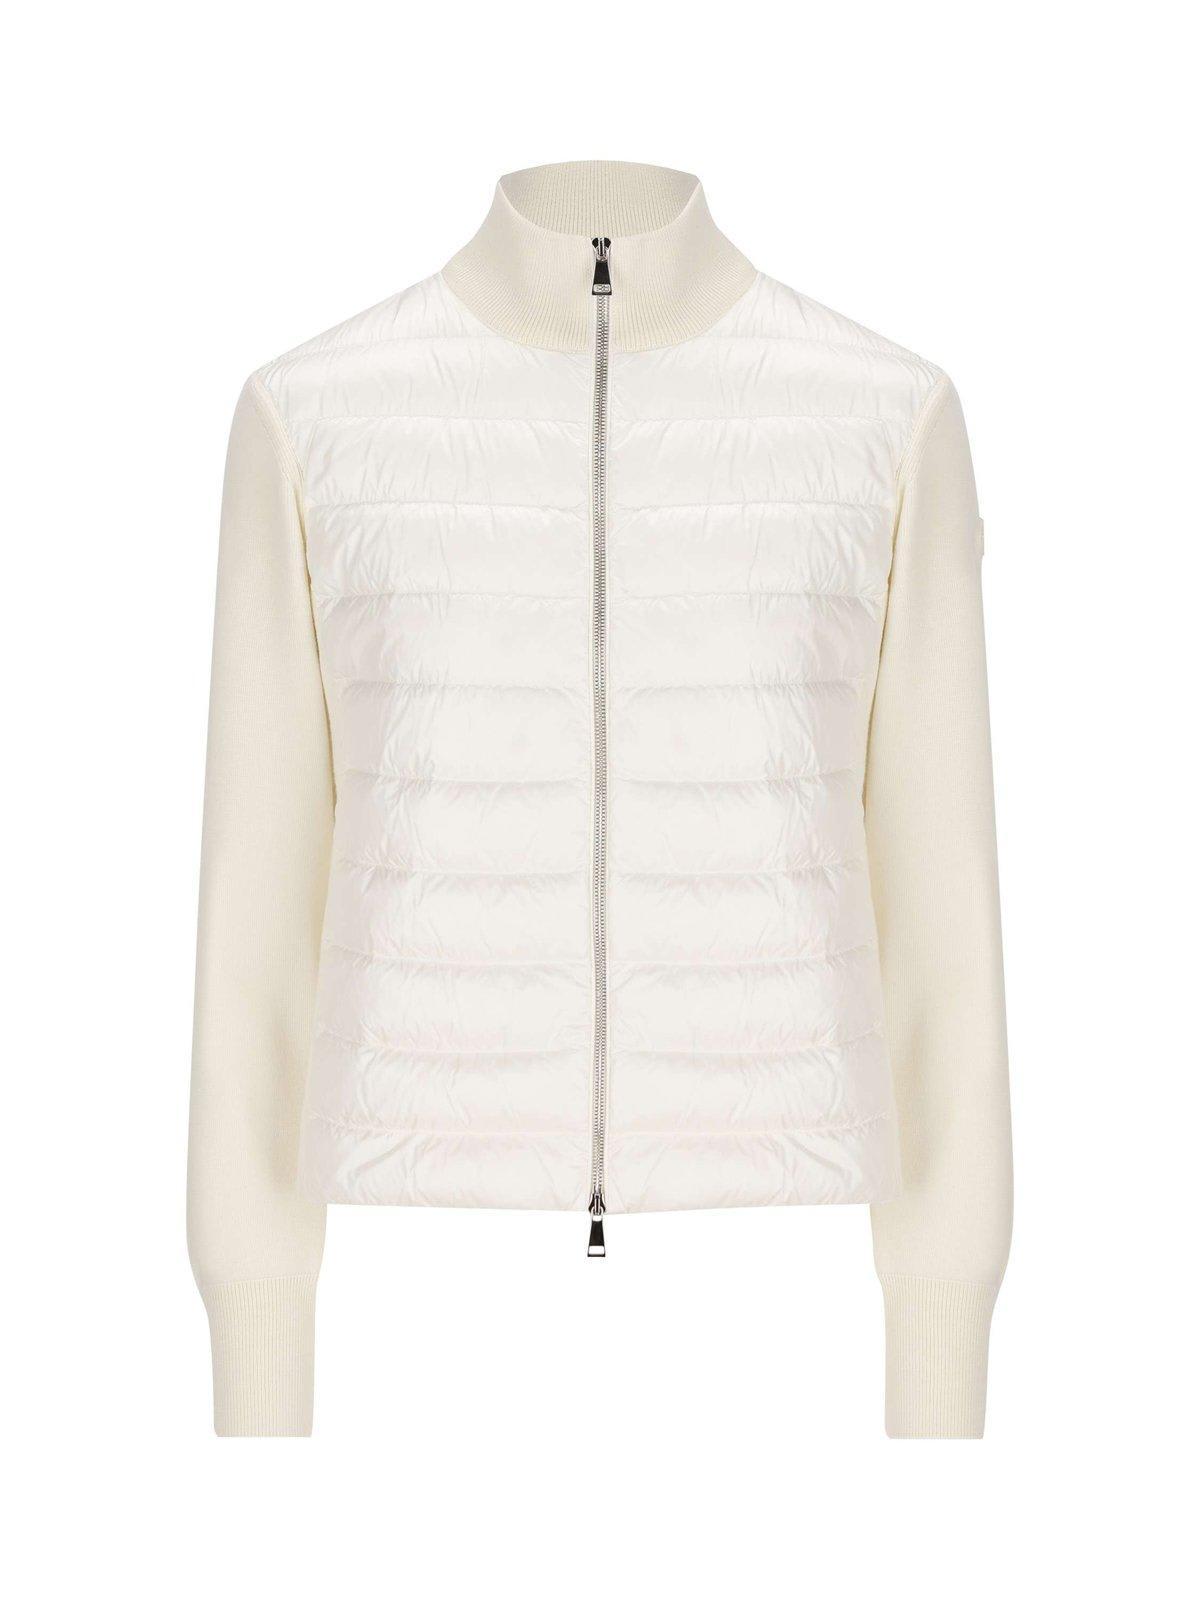 Moncler Chevron Quilted Cardigan Jacket in White | Lyst